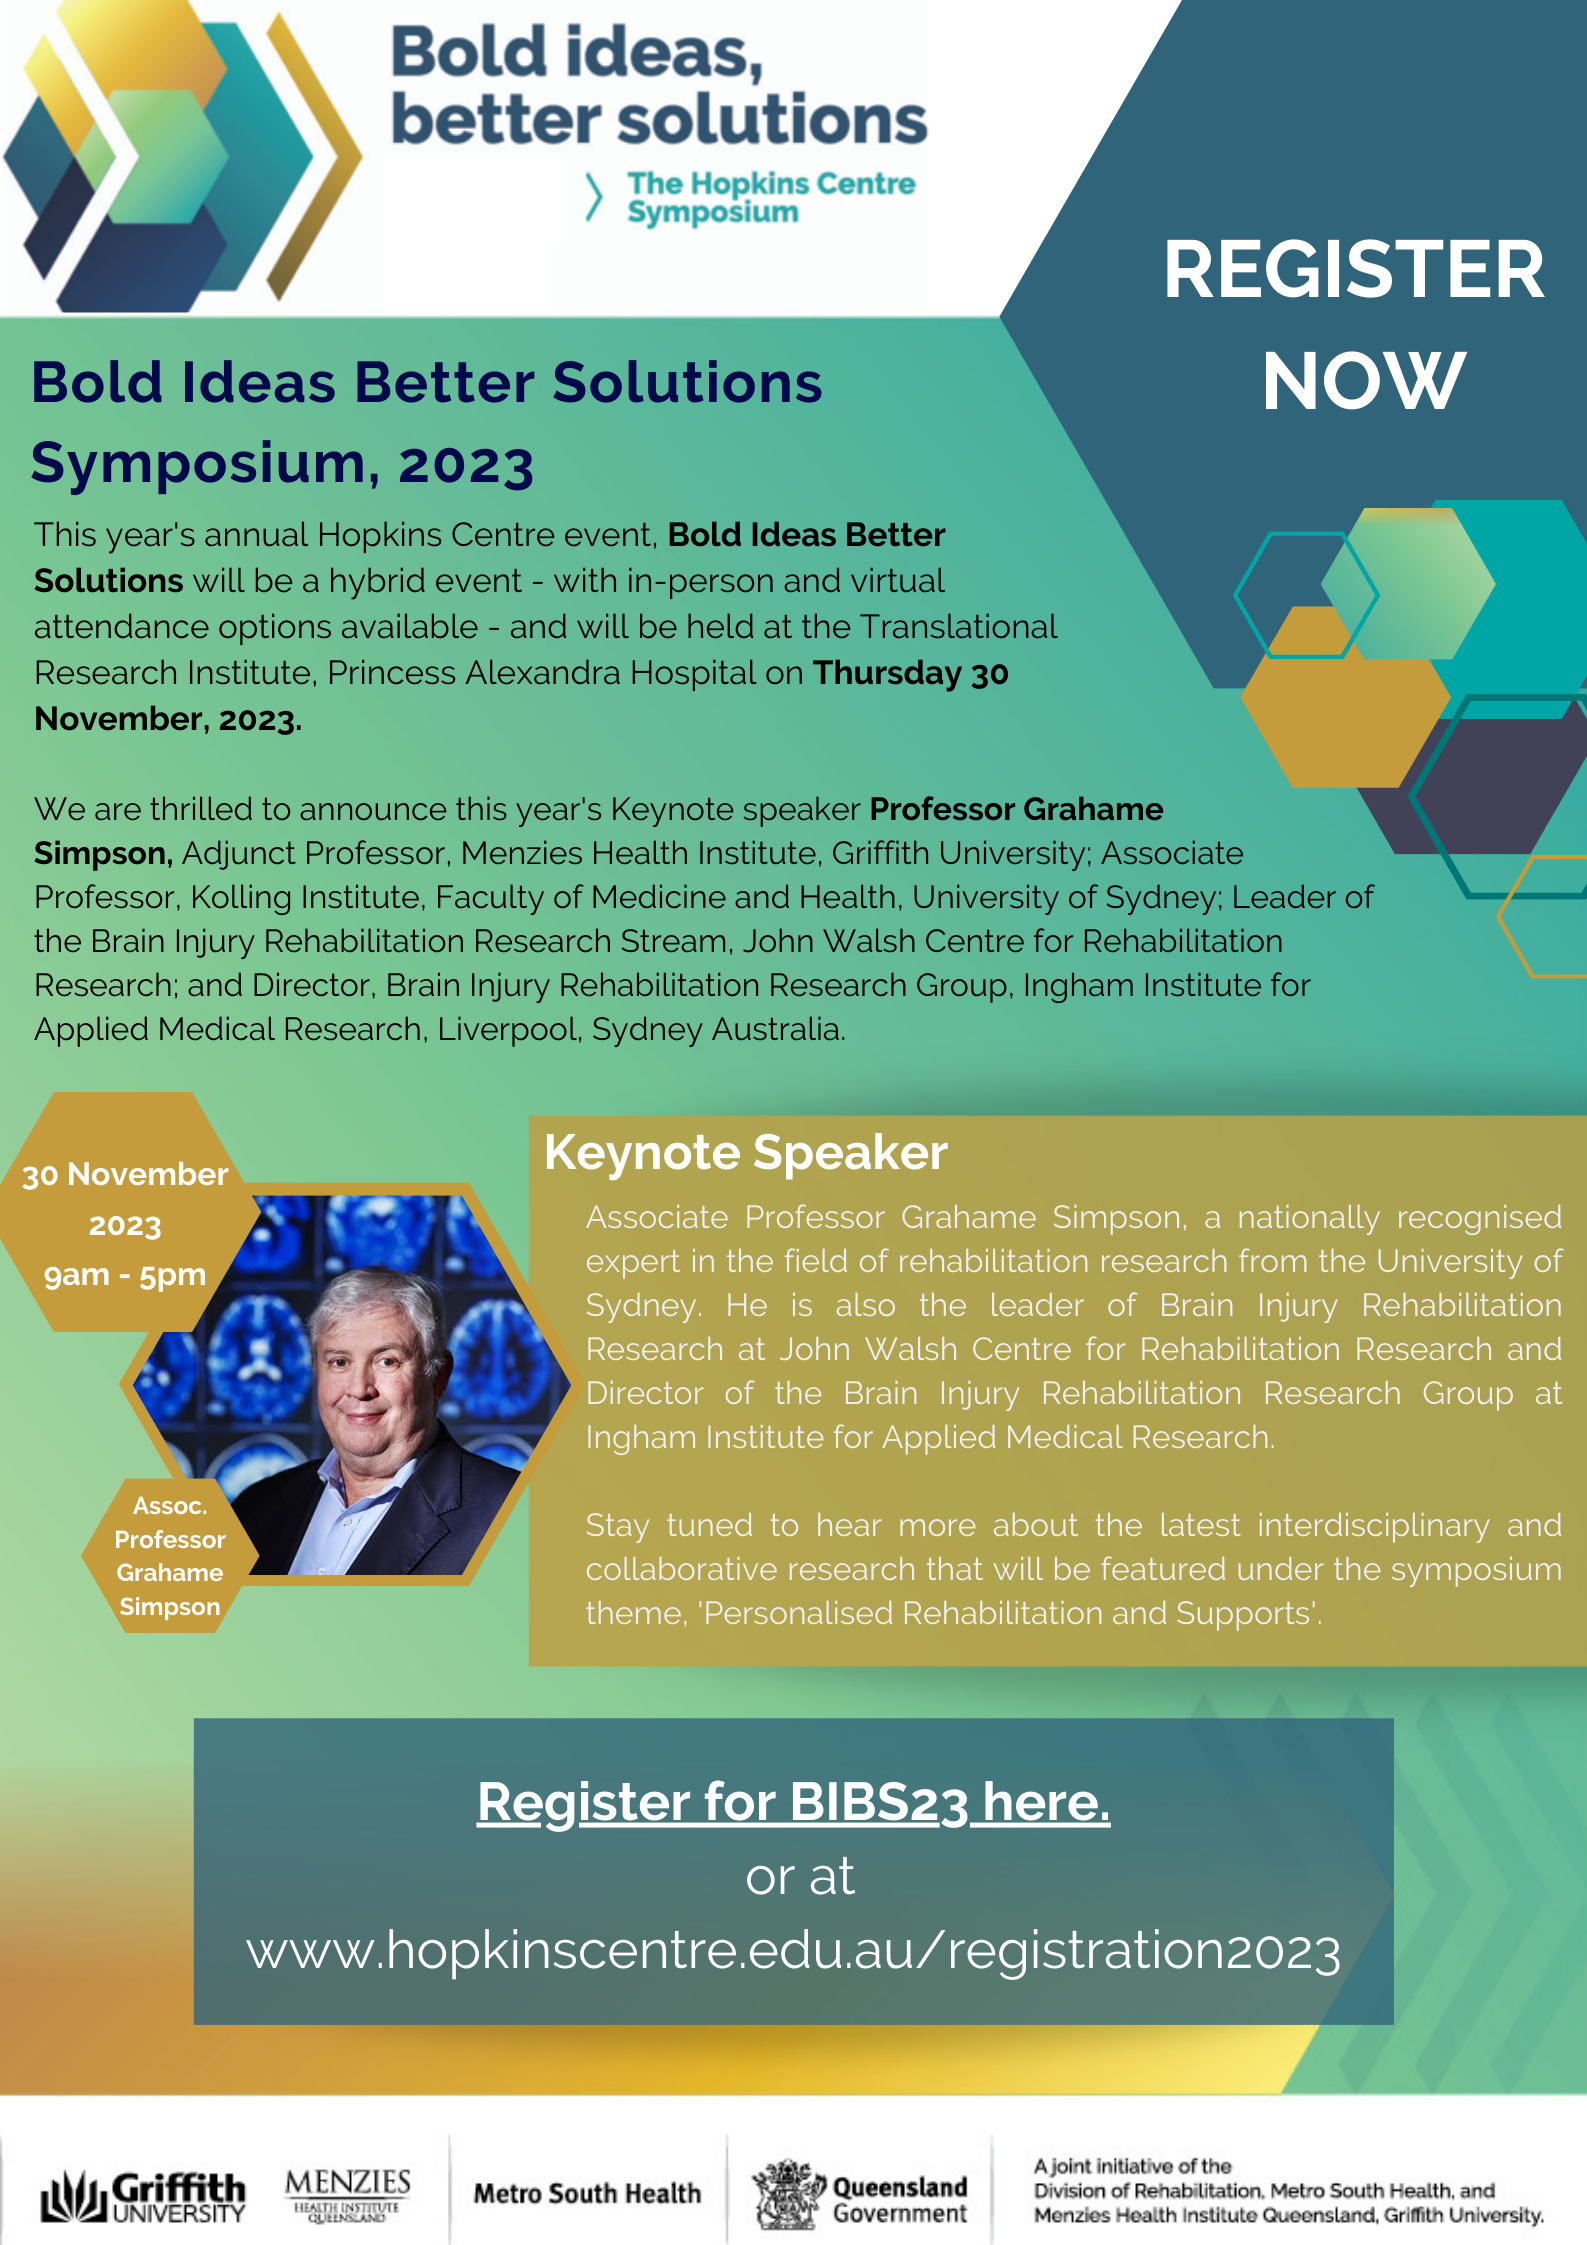 Bold Ideas Better Solutions poster, with BIBS logo and The Hopkins Centre colours. Information about the symposium and the keynote speaker are spread across the page, with a hexagonal profile image of Associate Professor Grahame Simpson